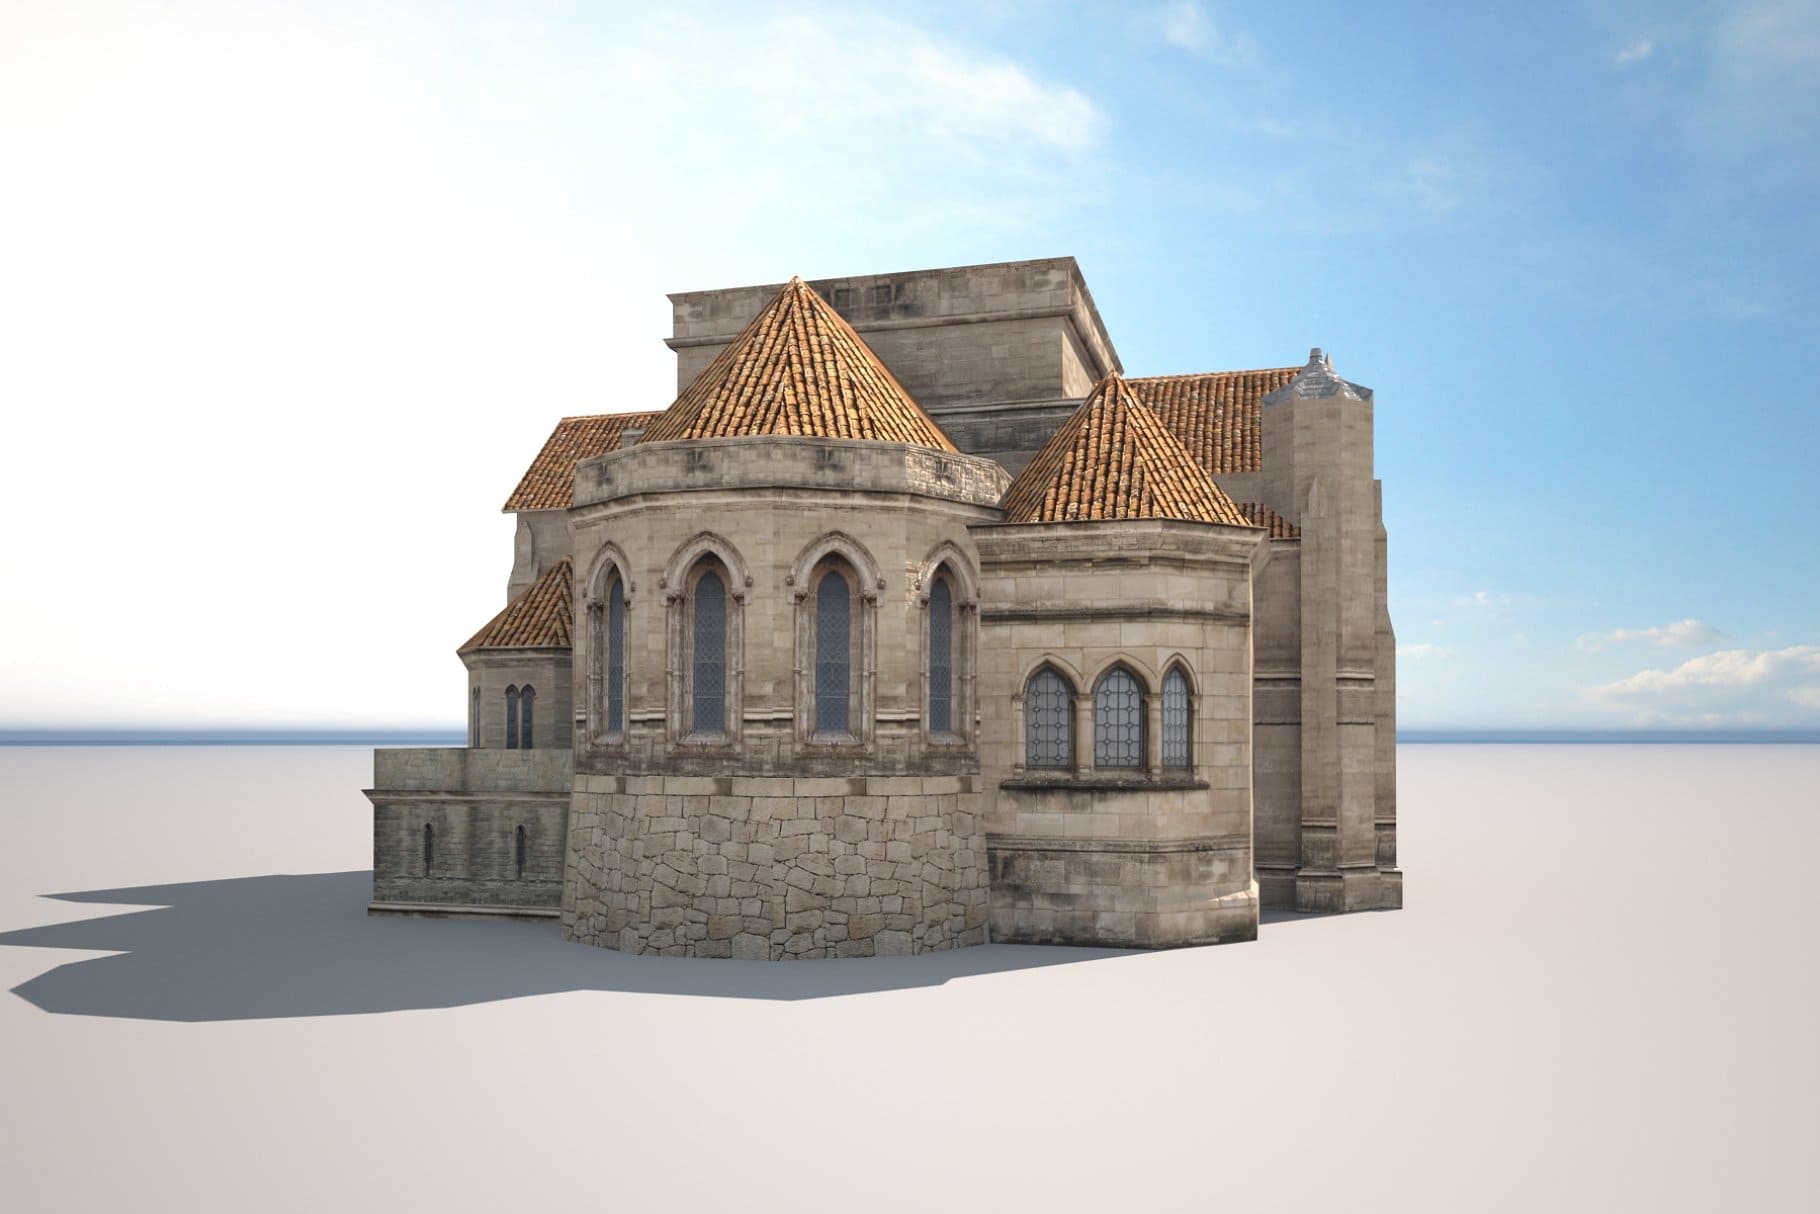 3D model of a church building with long columns.